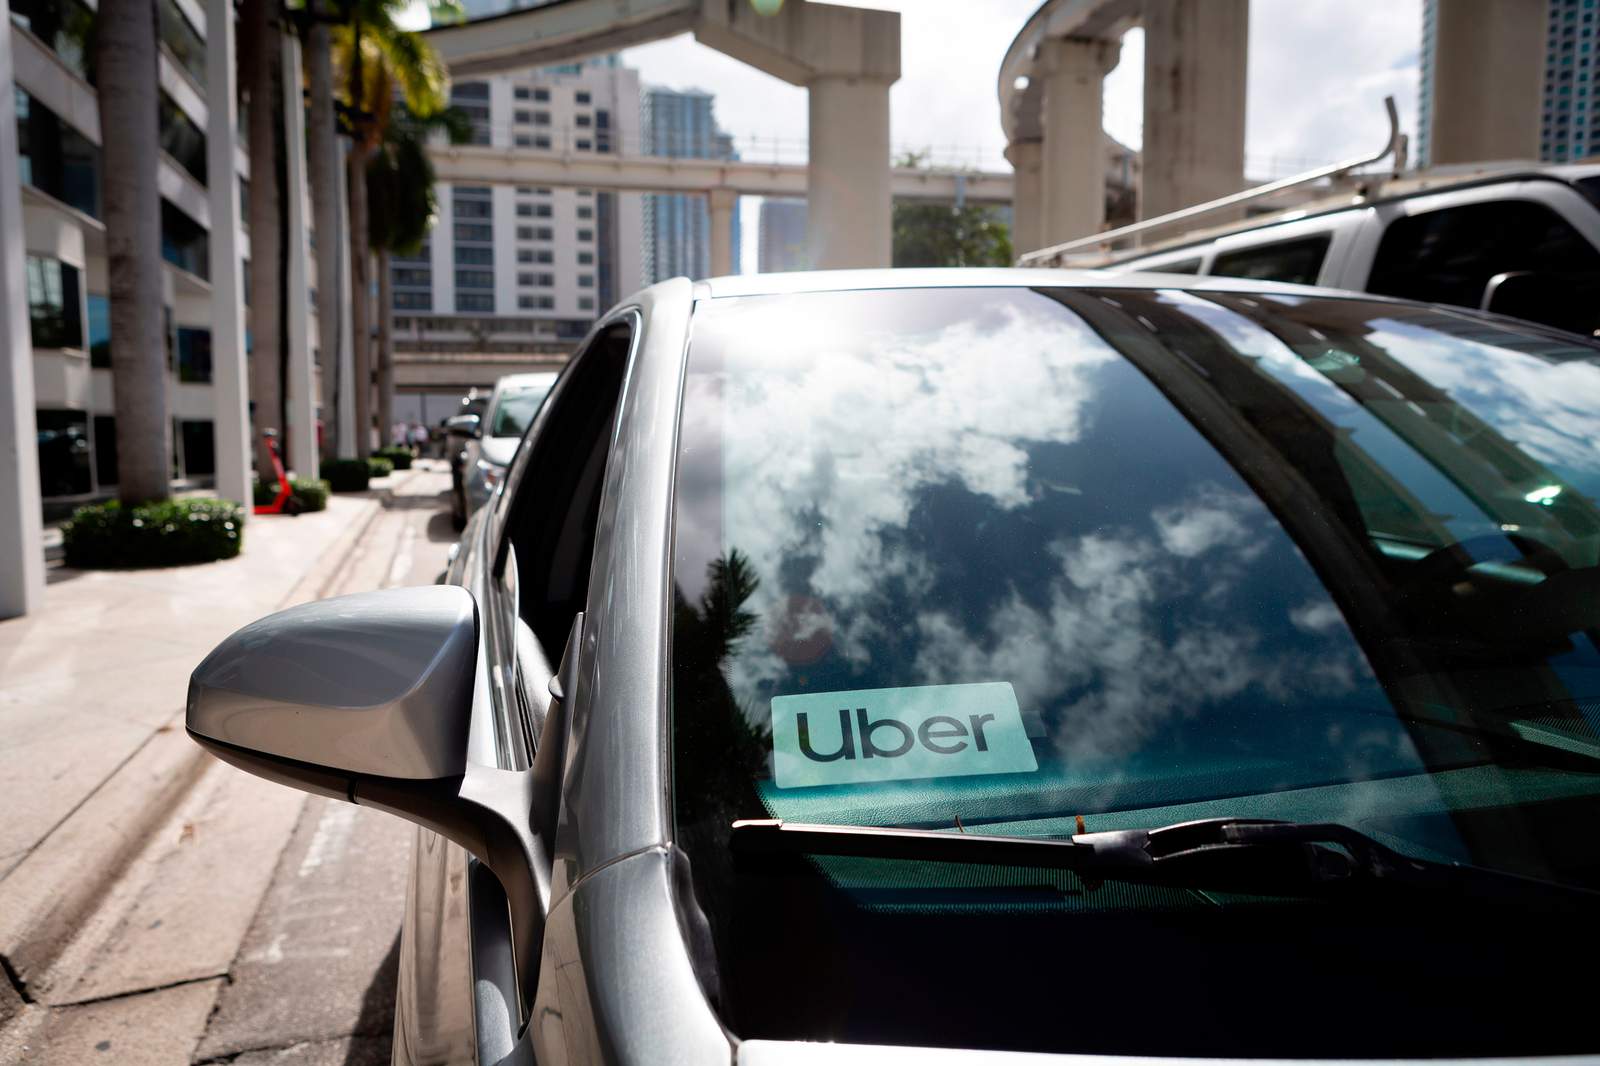 Face masks and mandatory selfies for drivers: How Uber rides are about to change